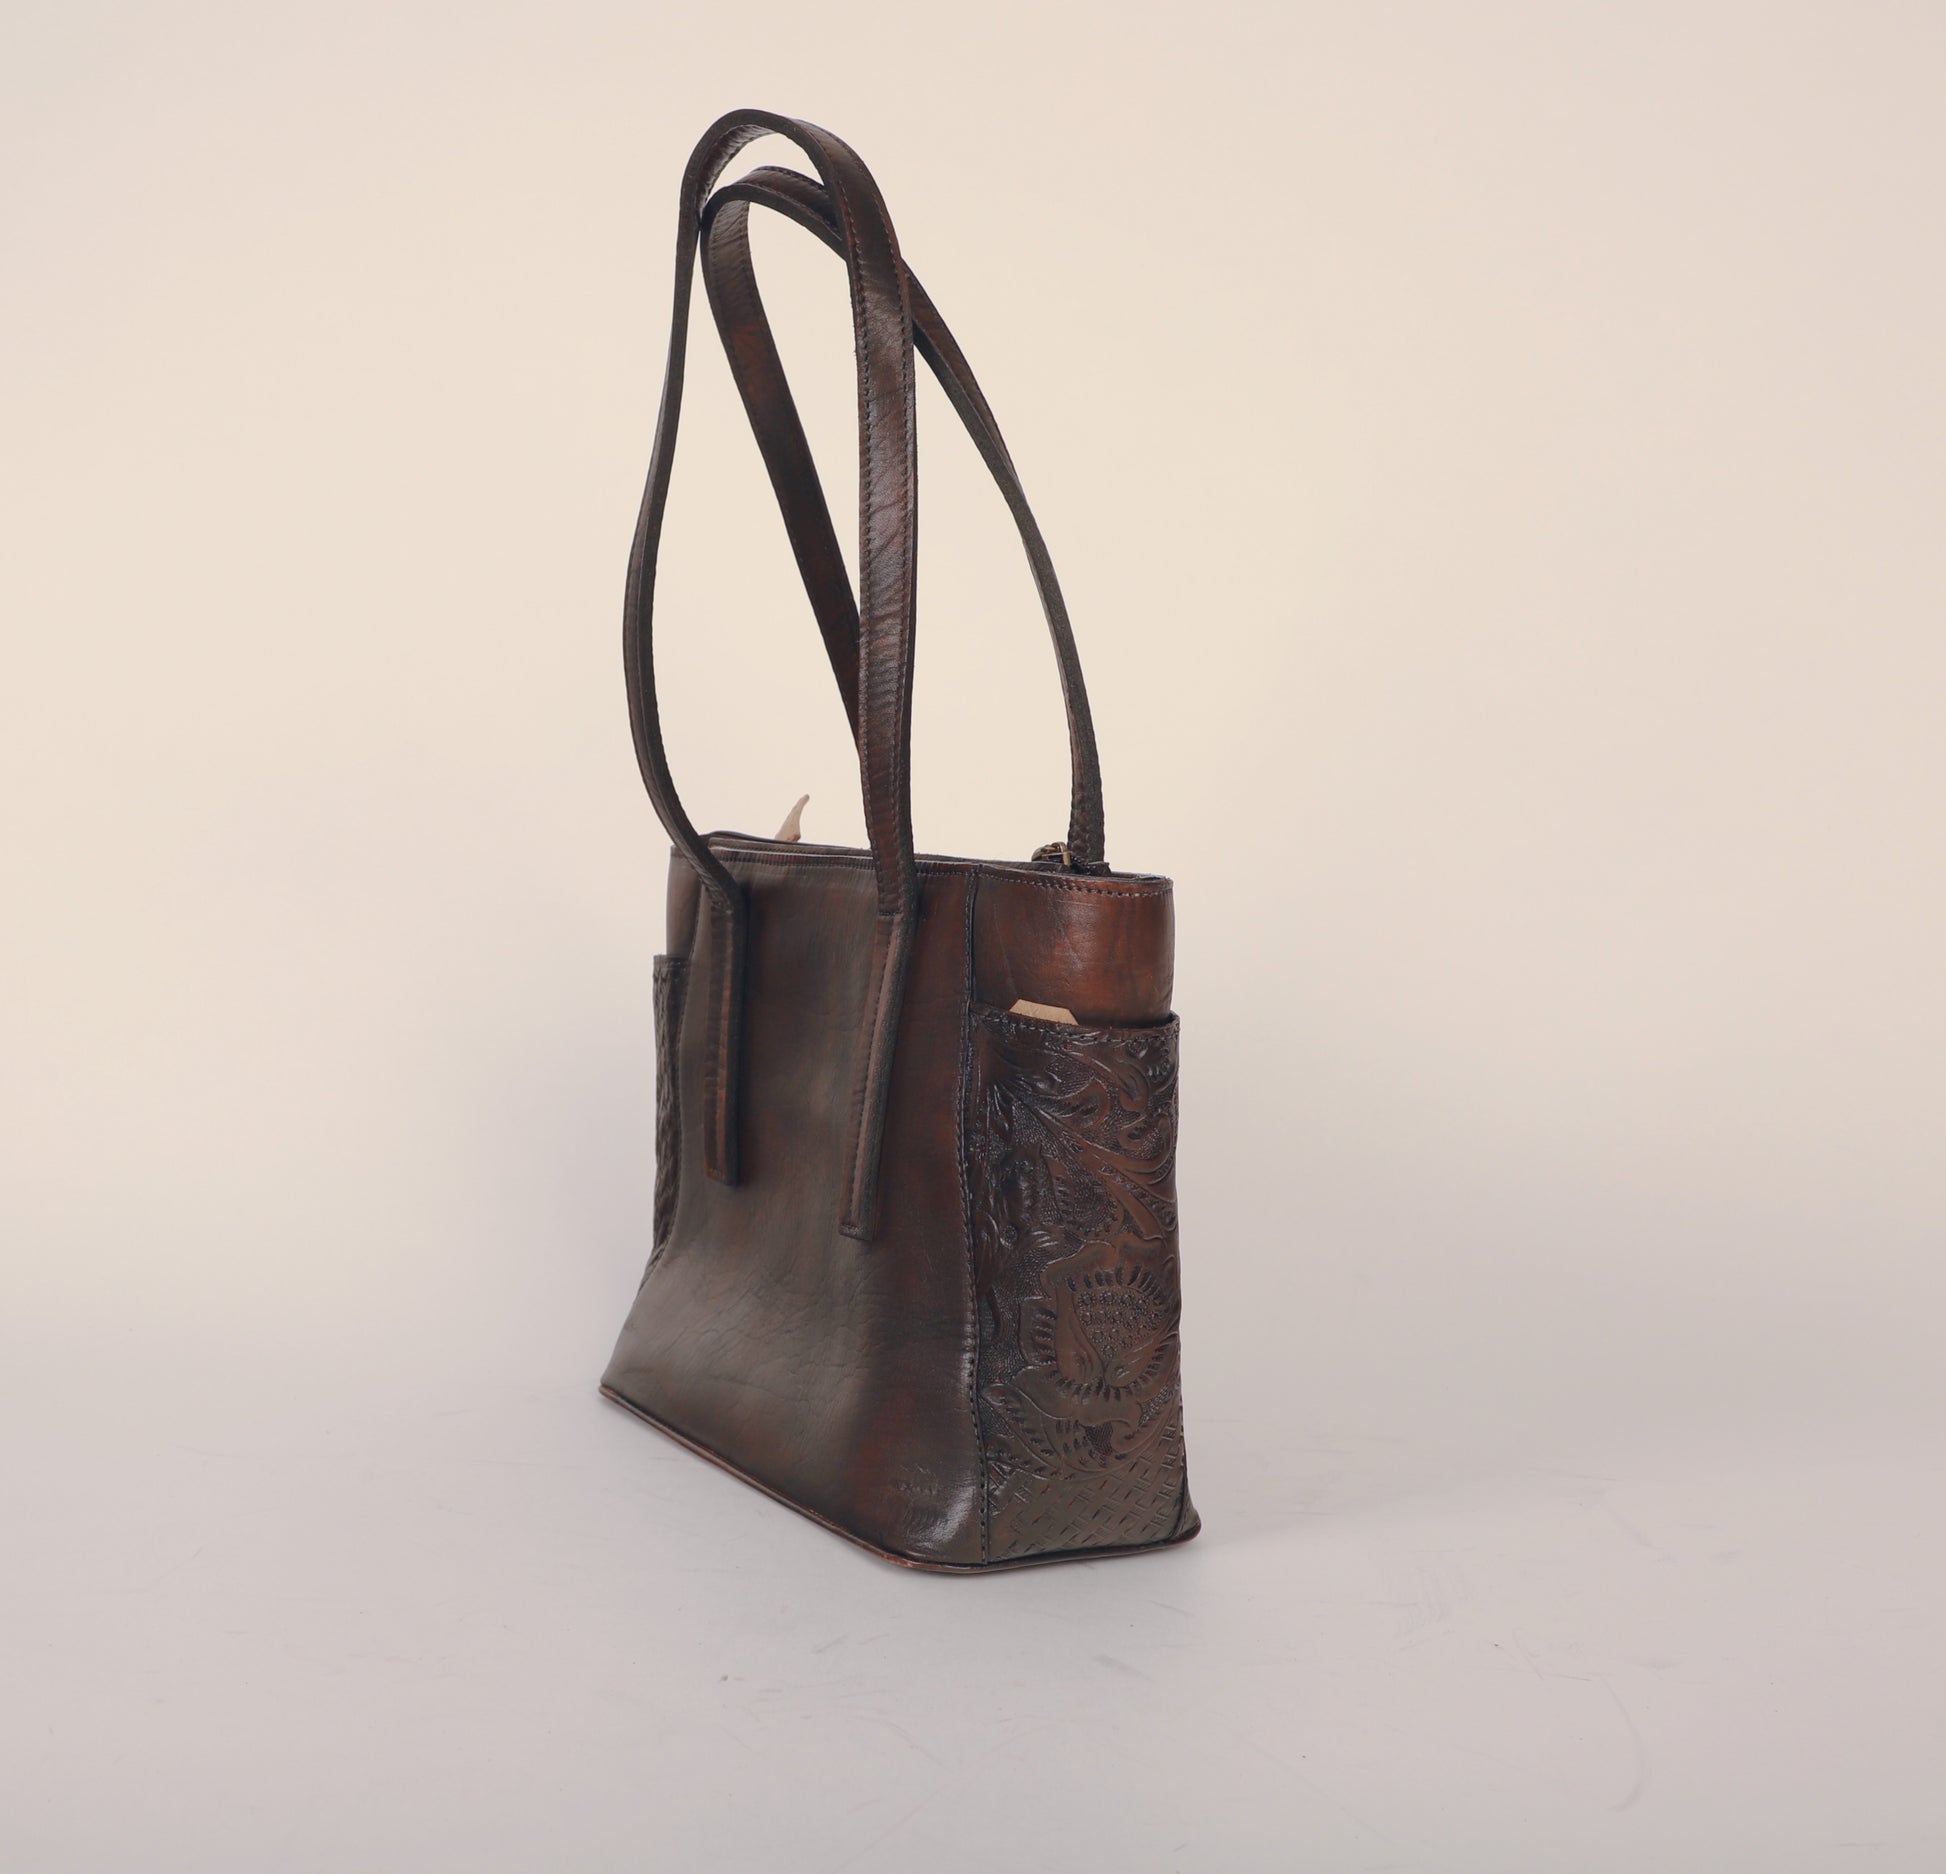 Medium-sized full leather tote bag with traditional Mexican design on side pockets. Fully lined with suede with strap length displayed. Color Chadron or brown.